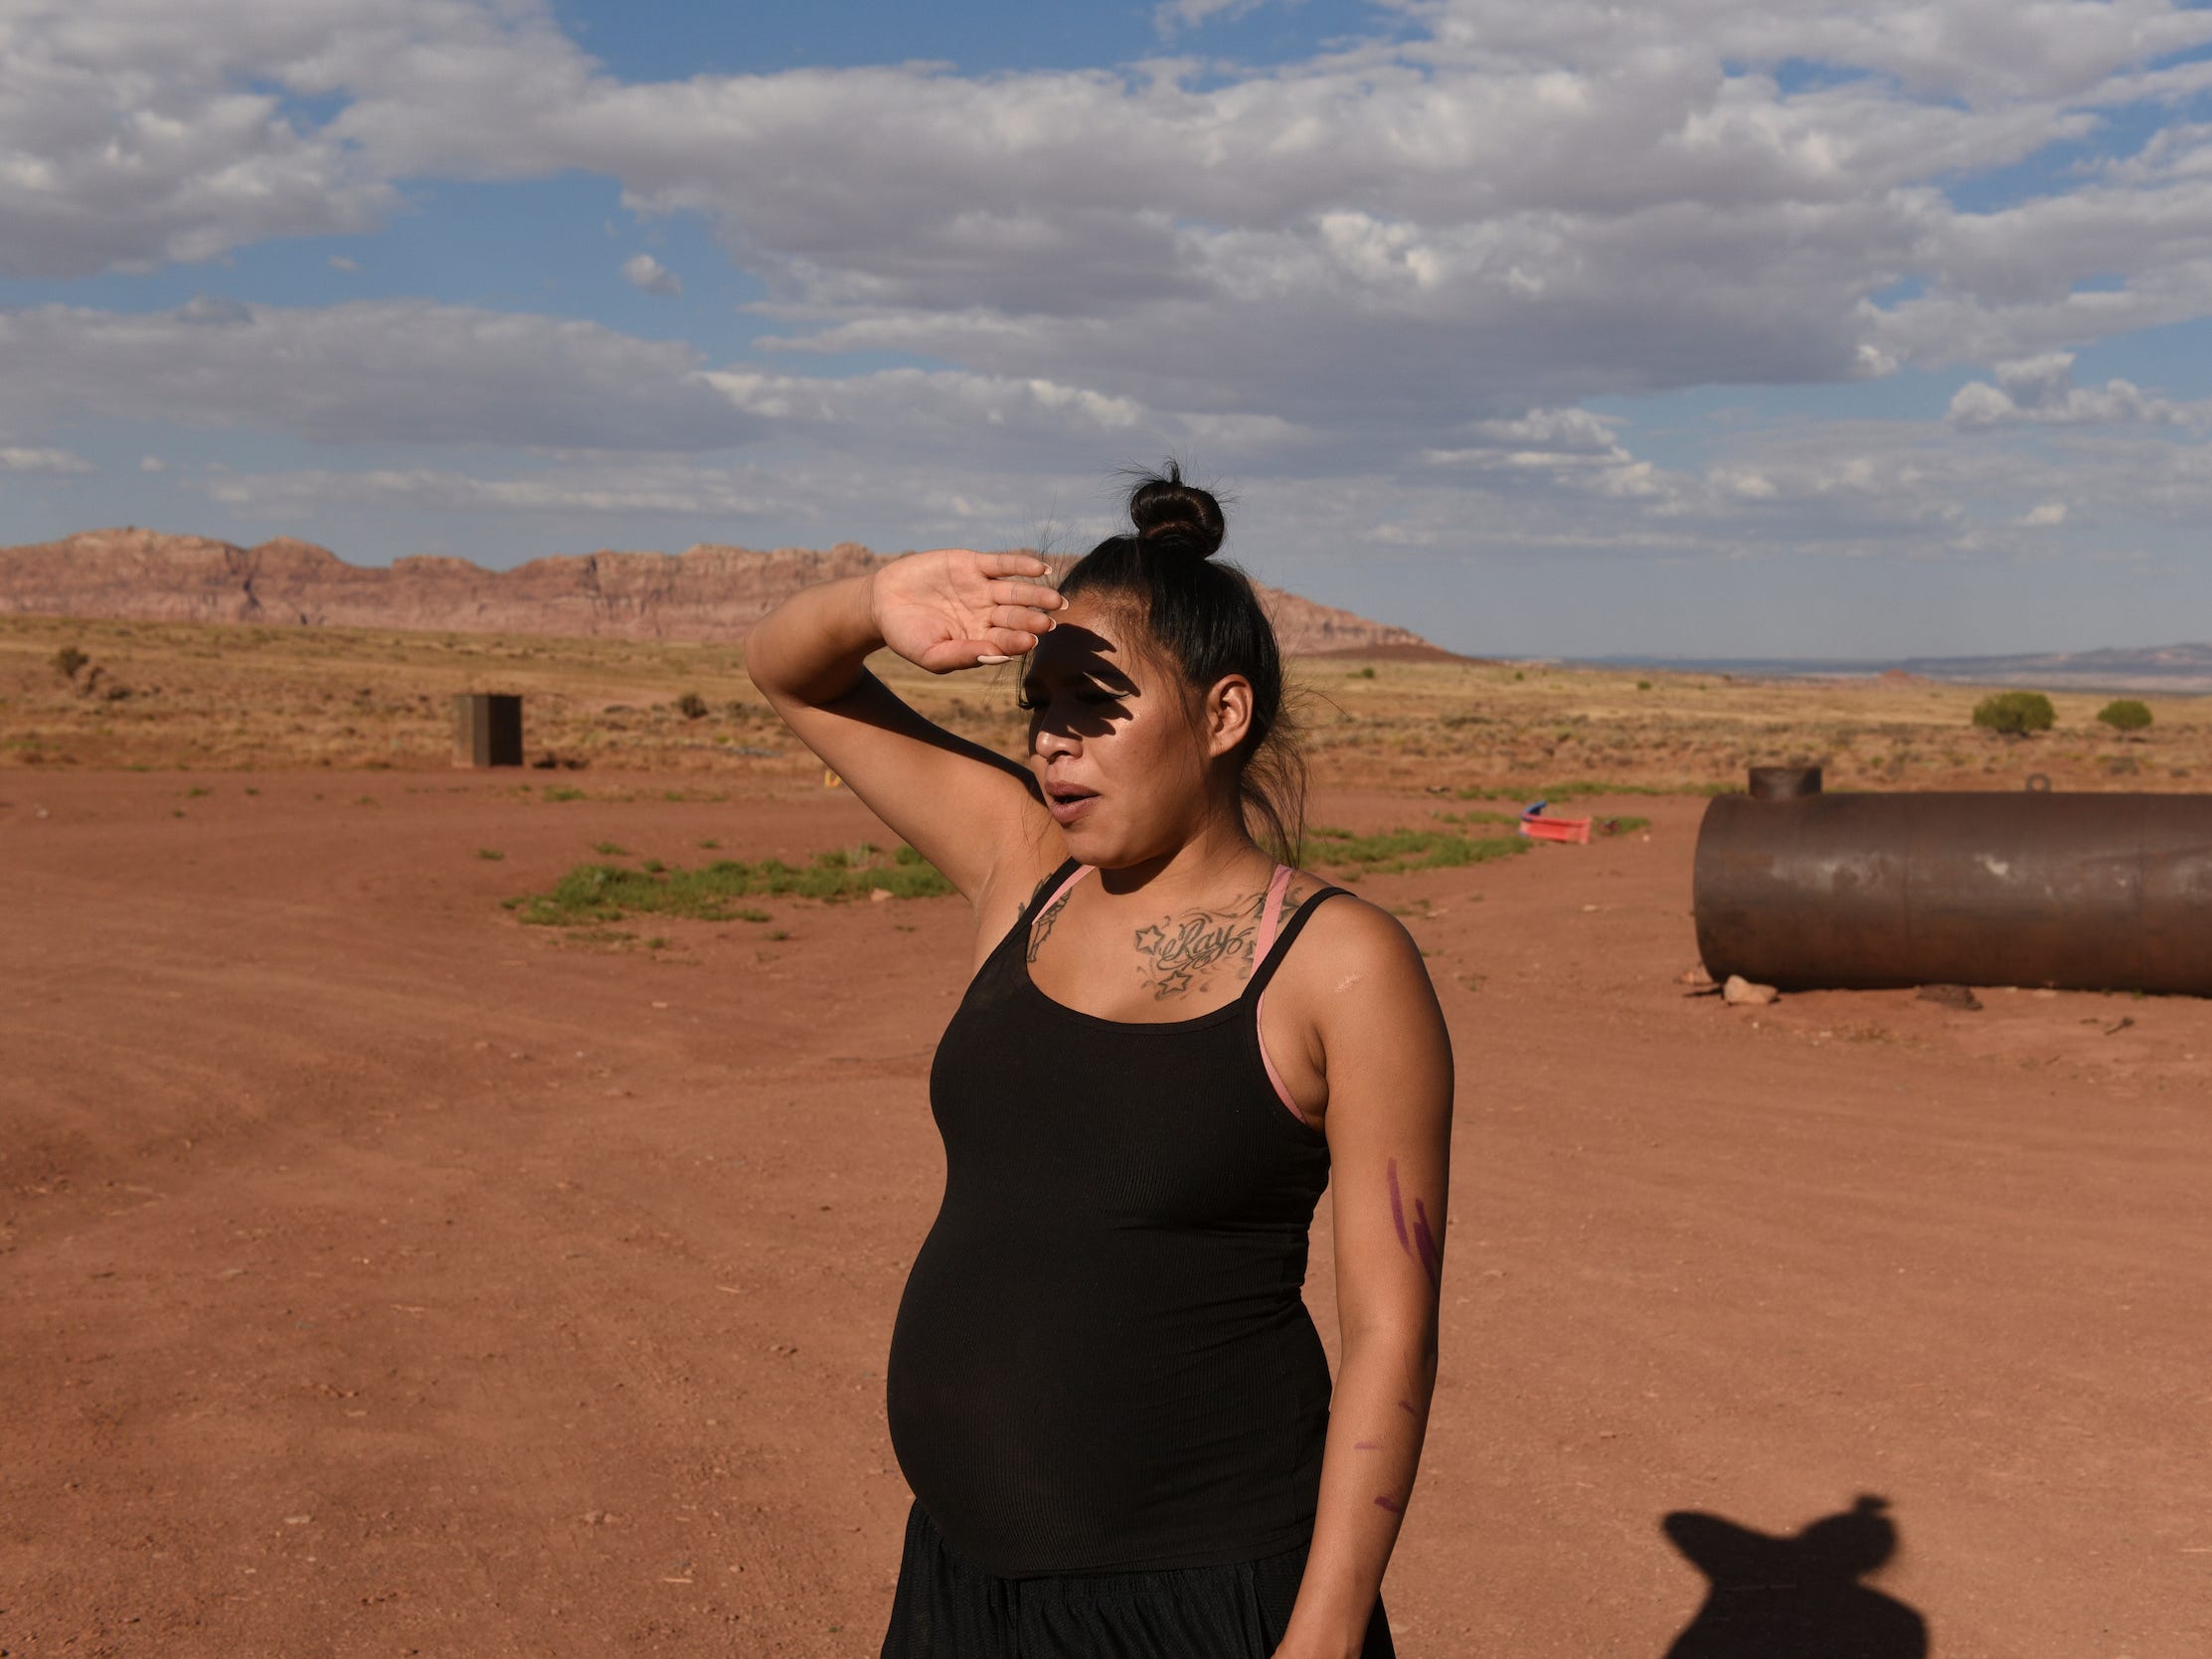 pregnant woman wearing black shades eyes from the sun in arizona desert